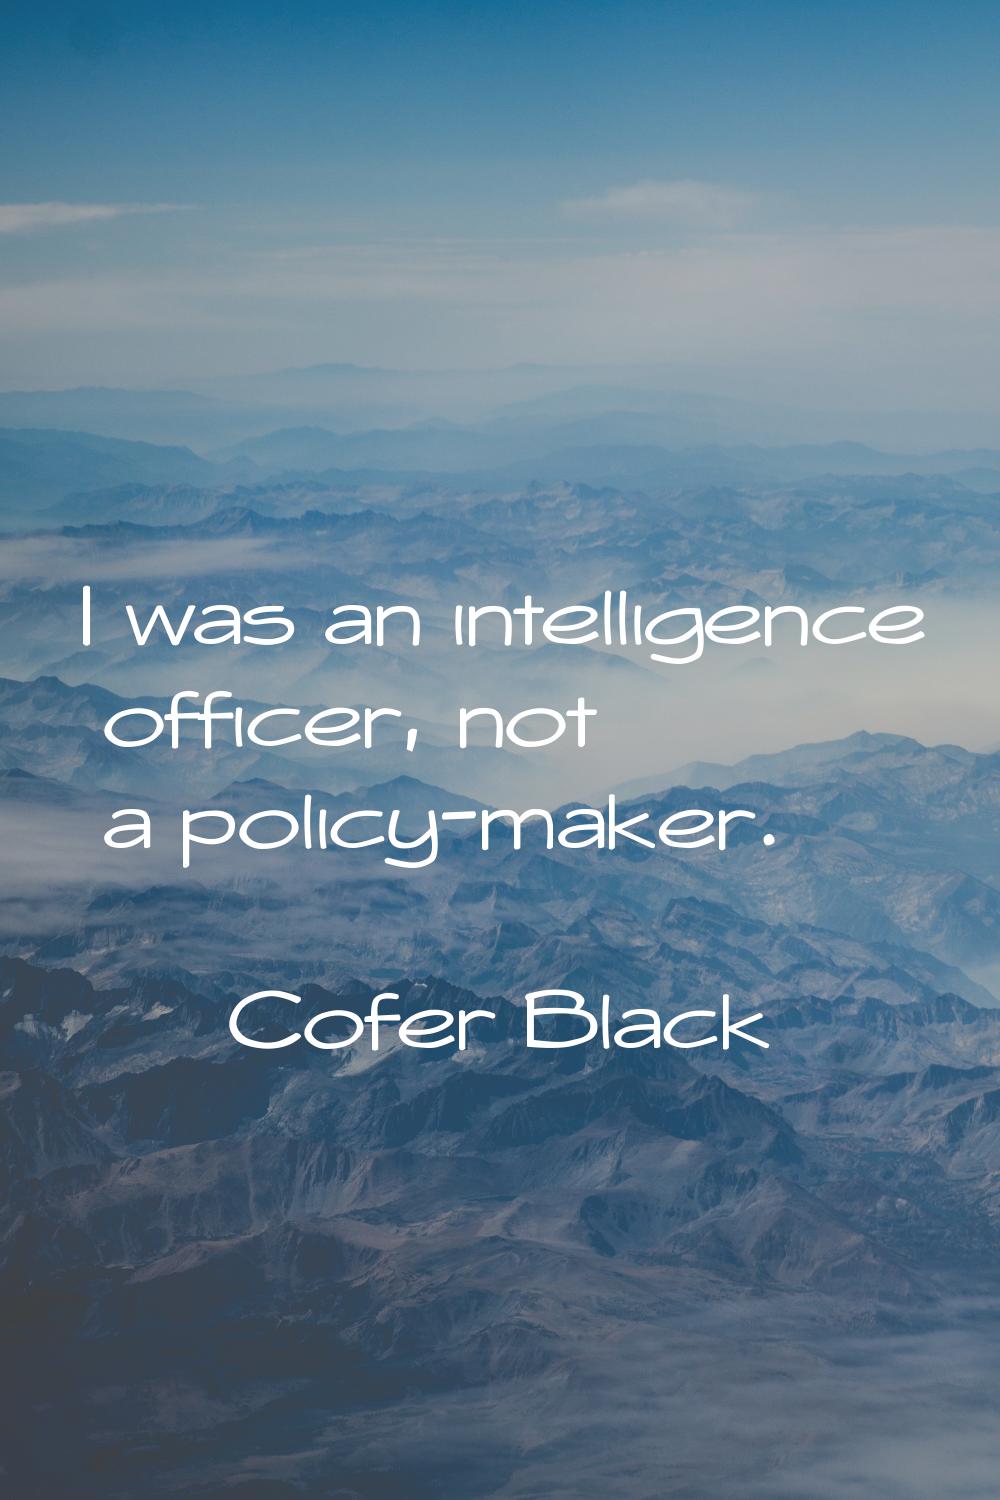 I was an intelligence officer, not a policy-maker.